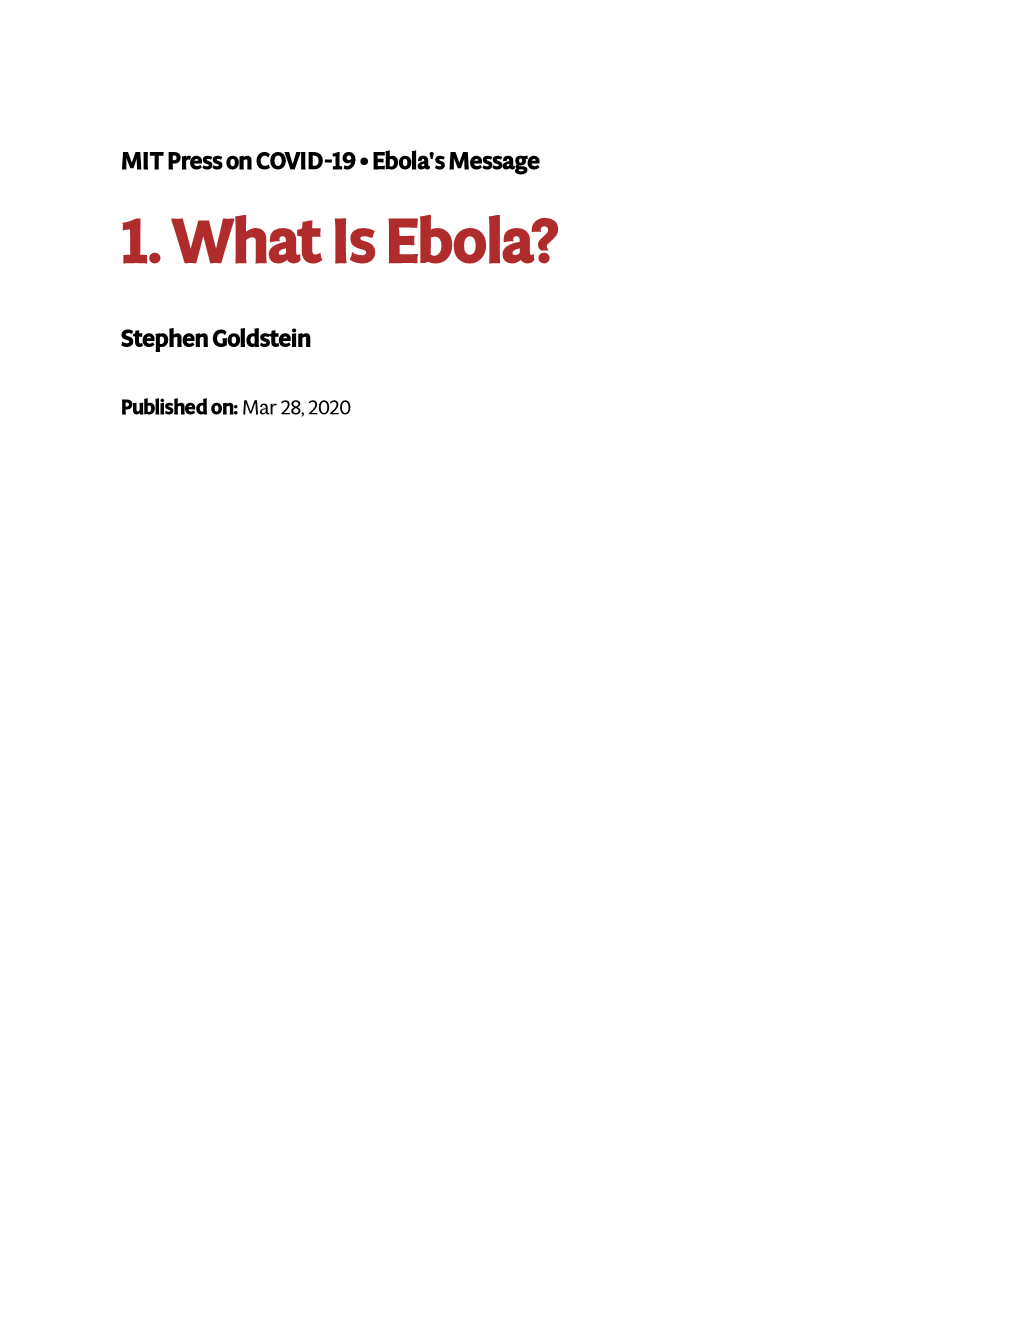 1. What Is Ebola?